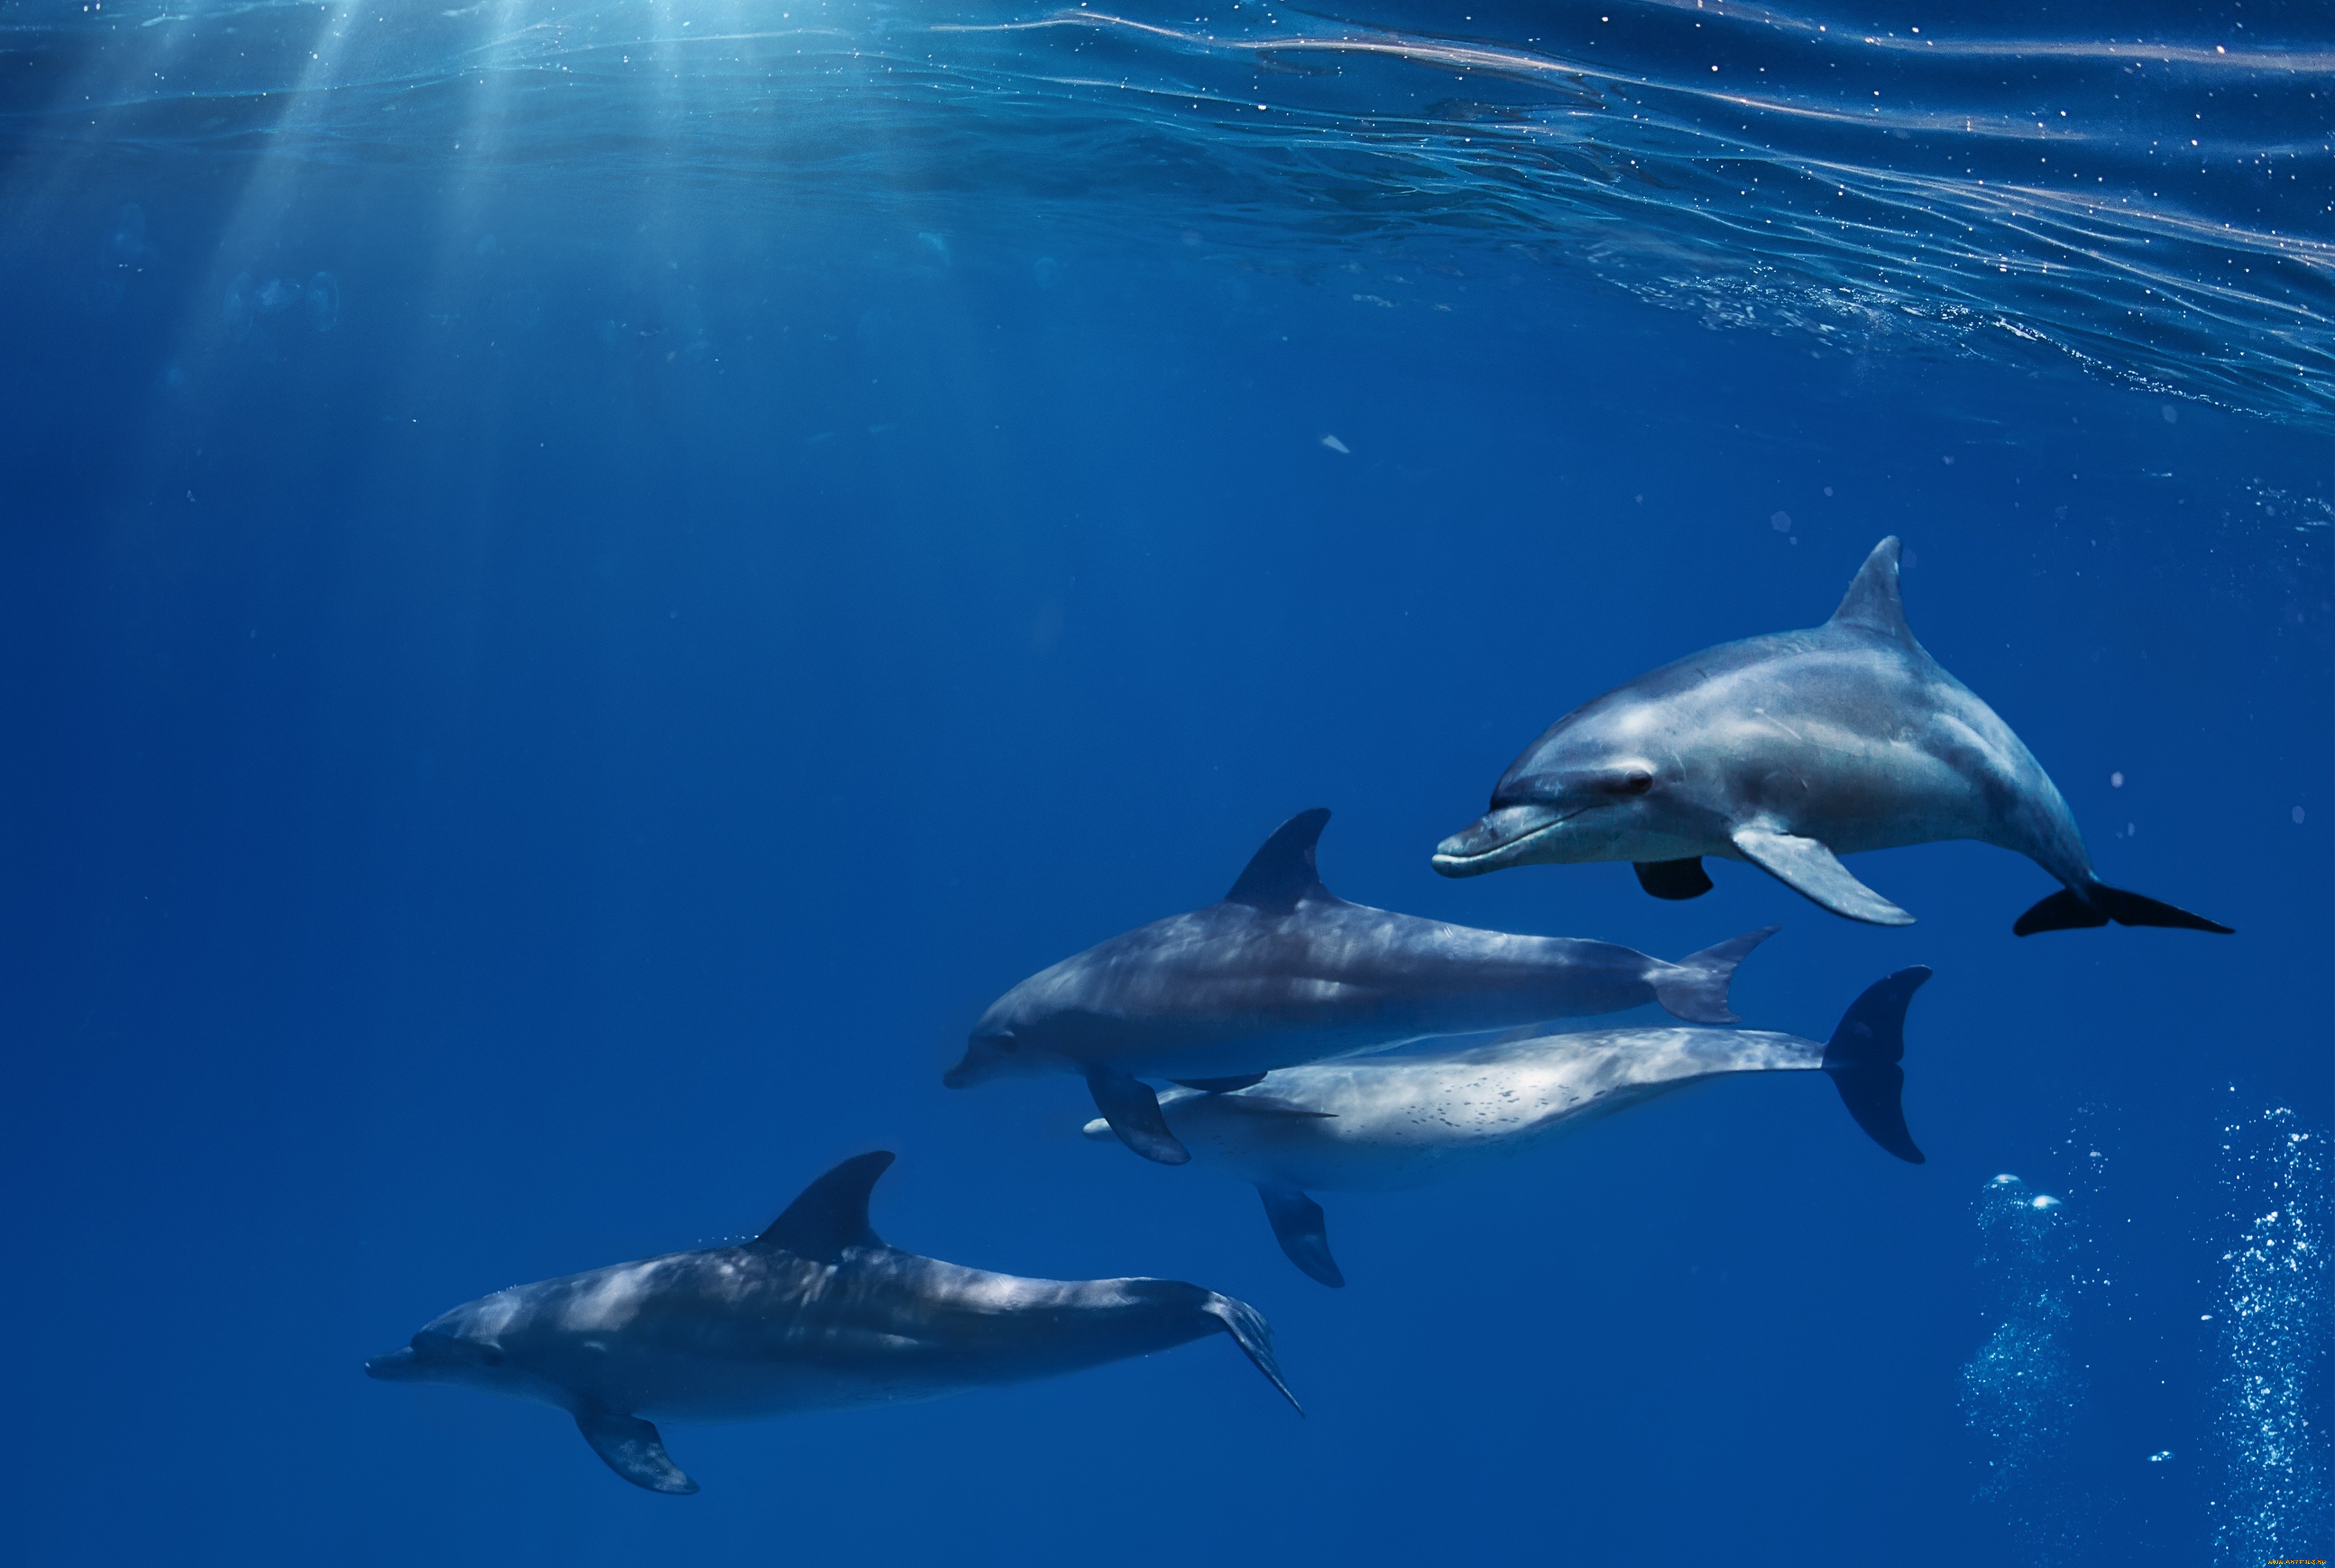  Dolphin Windows Backgrounds